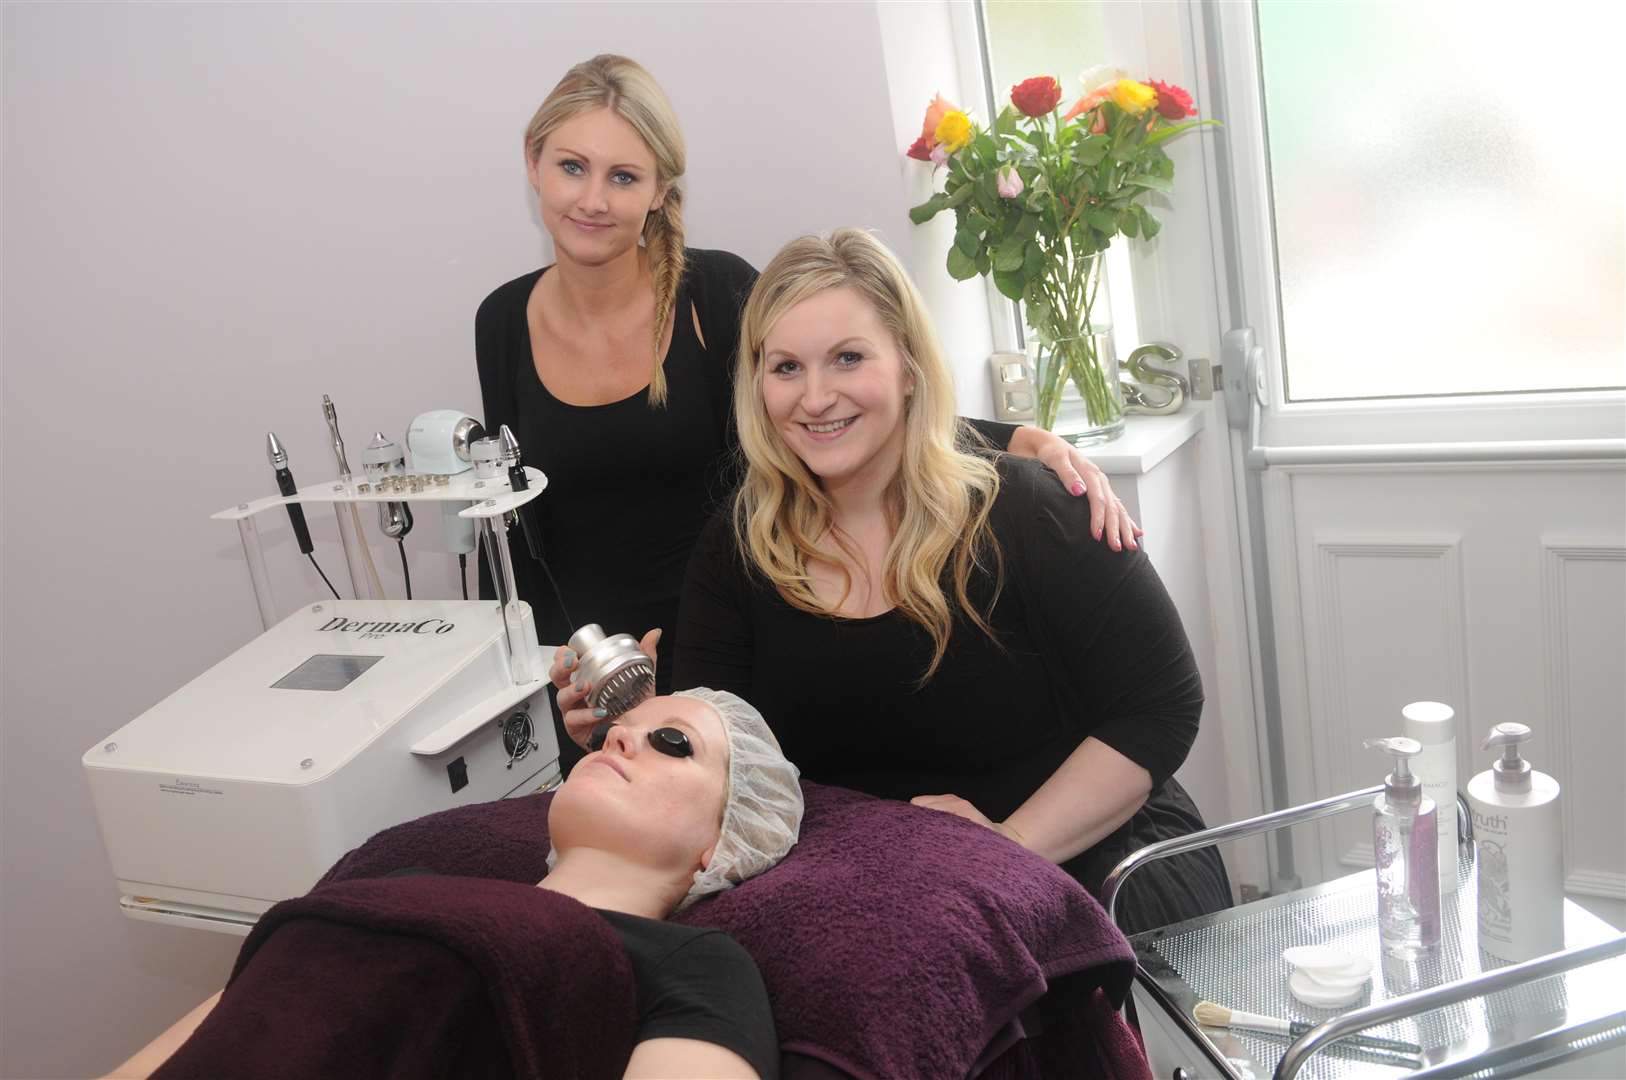 Hired therapist Milly Eason and Gemma Dale who is expanding her beauty salon business Bliss into new premises